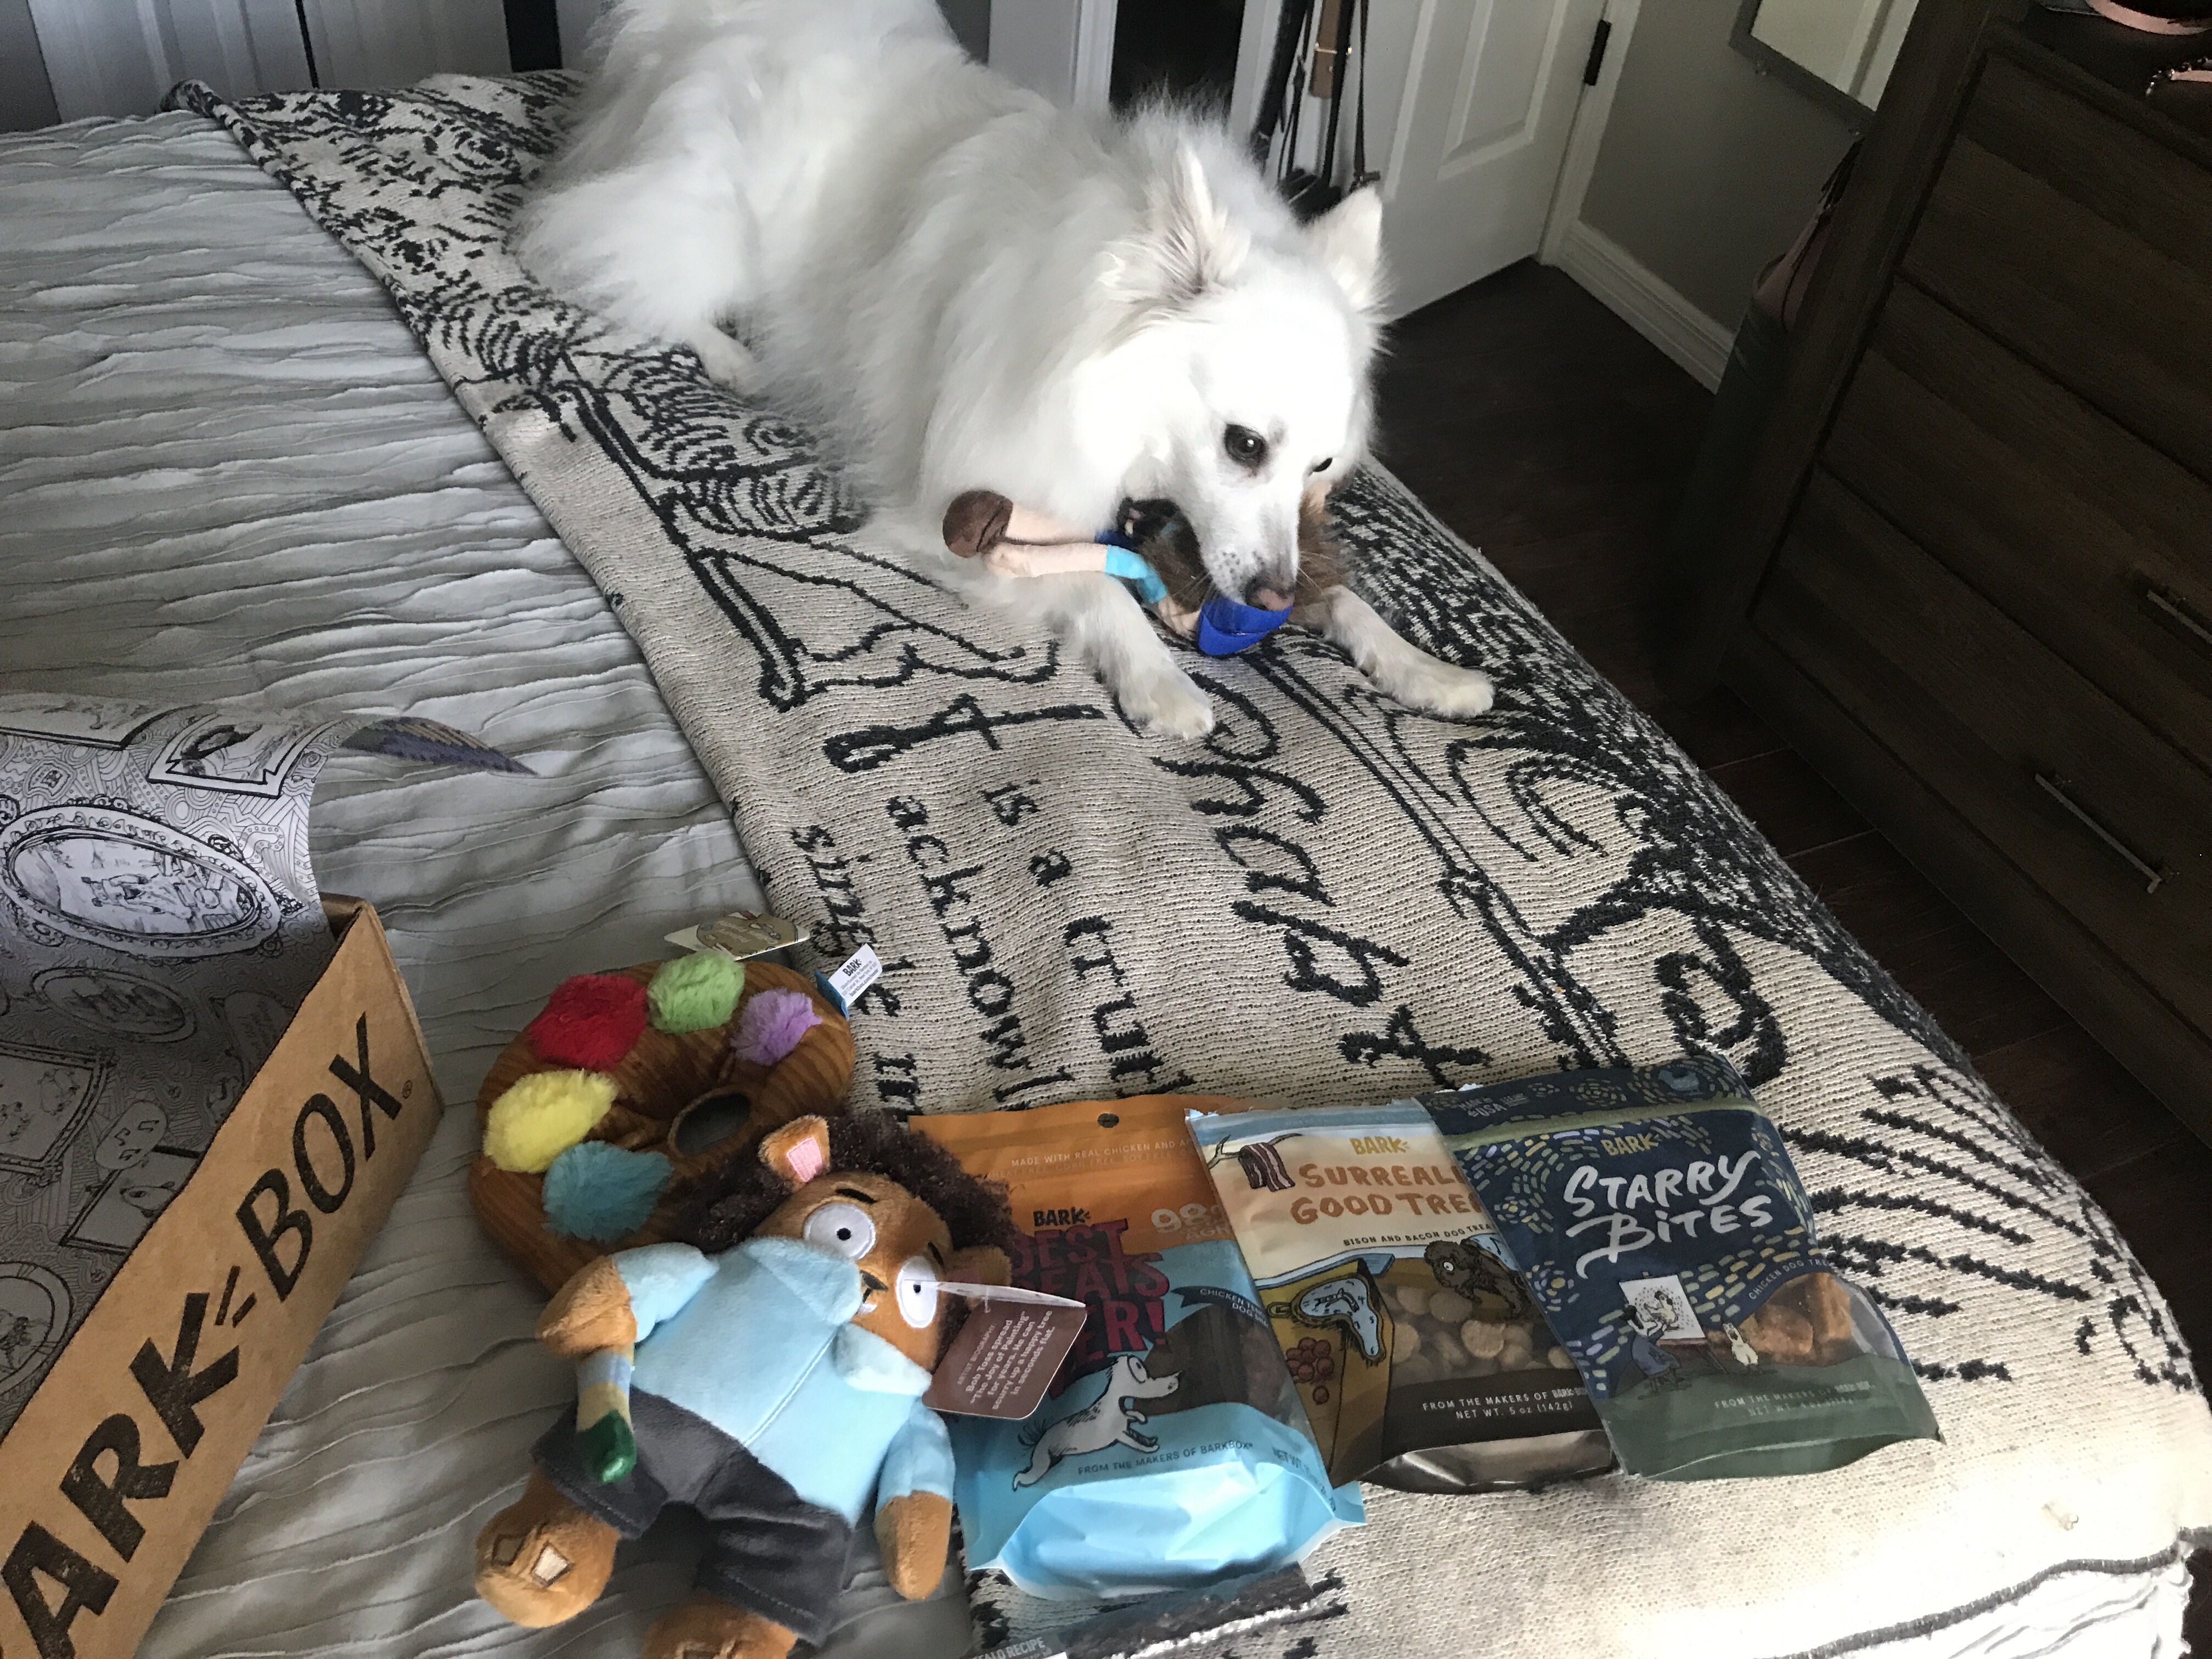 A BarkBox Review - The Cheapest Way to Entertain Your Dog